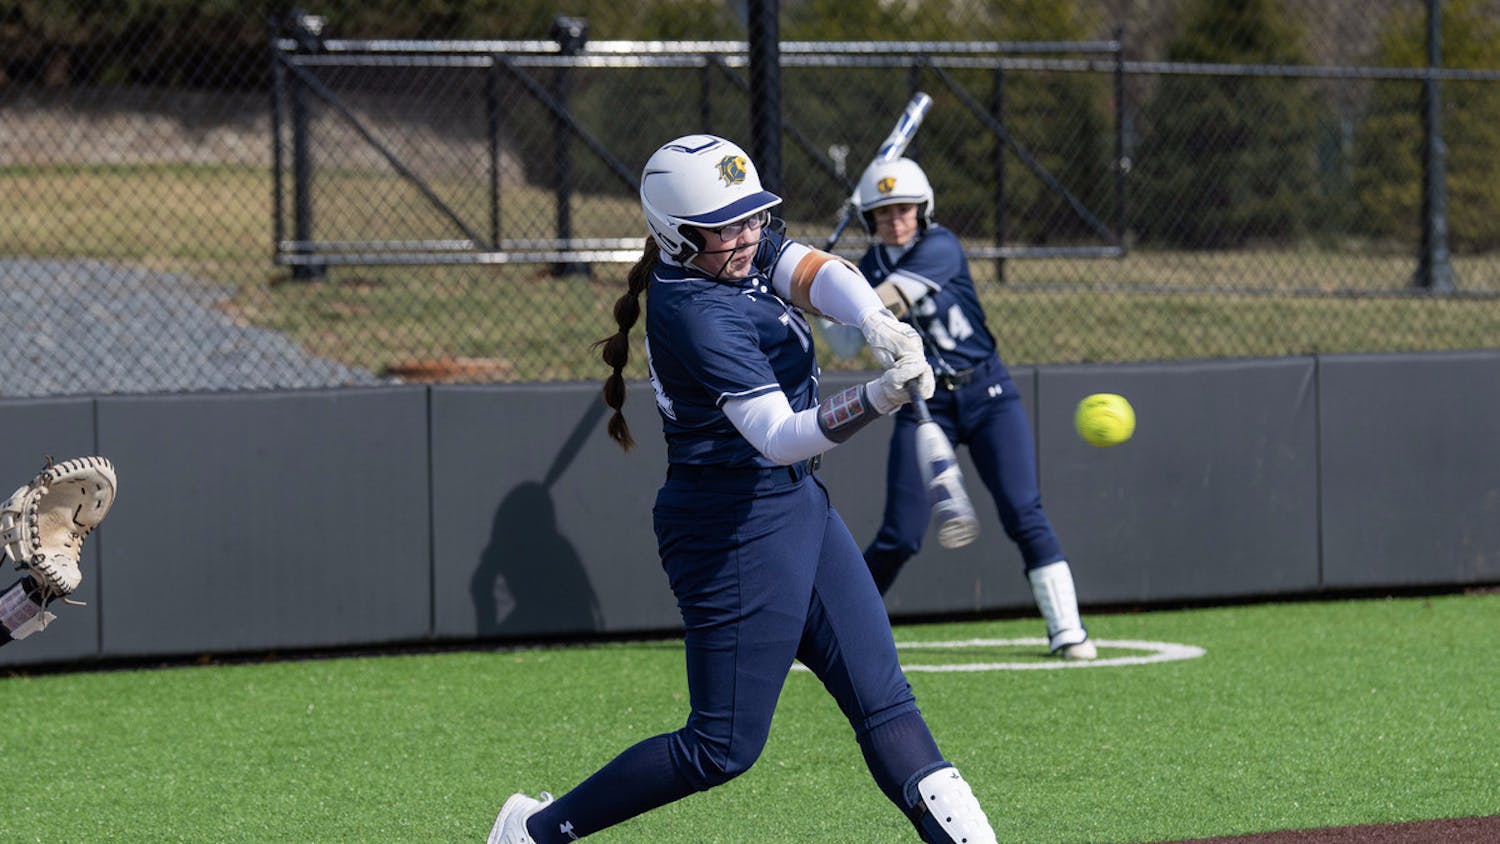 Sophomore first baseman Camryn Kitchin at the plate (Photo courtesy of Jimmy Alagna).